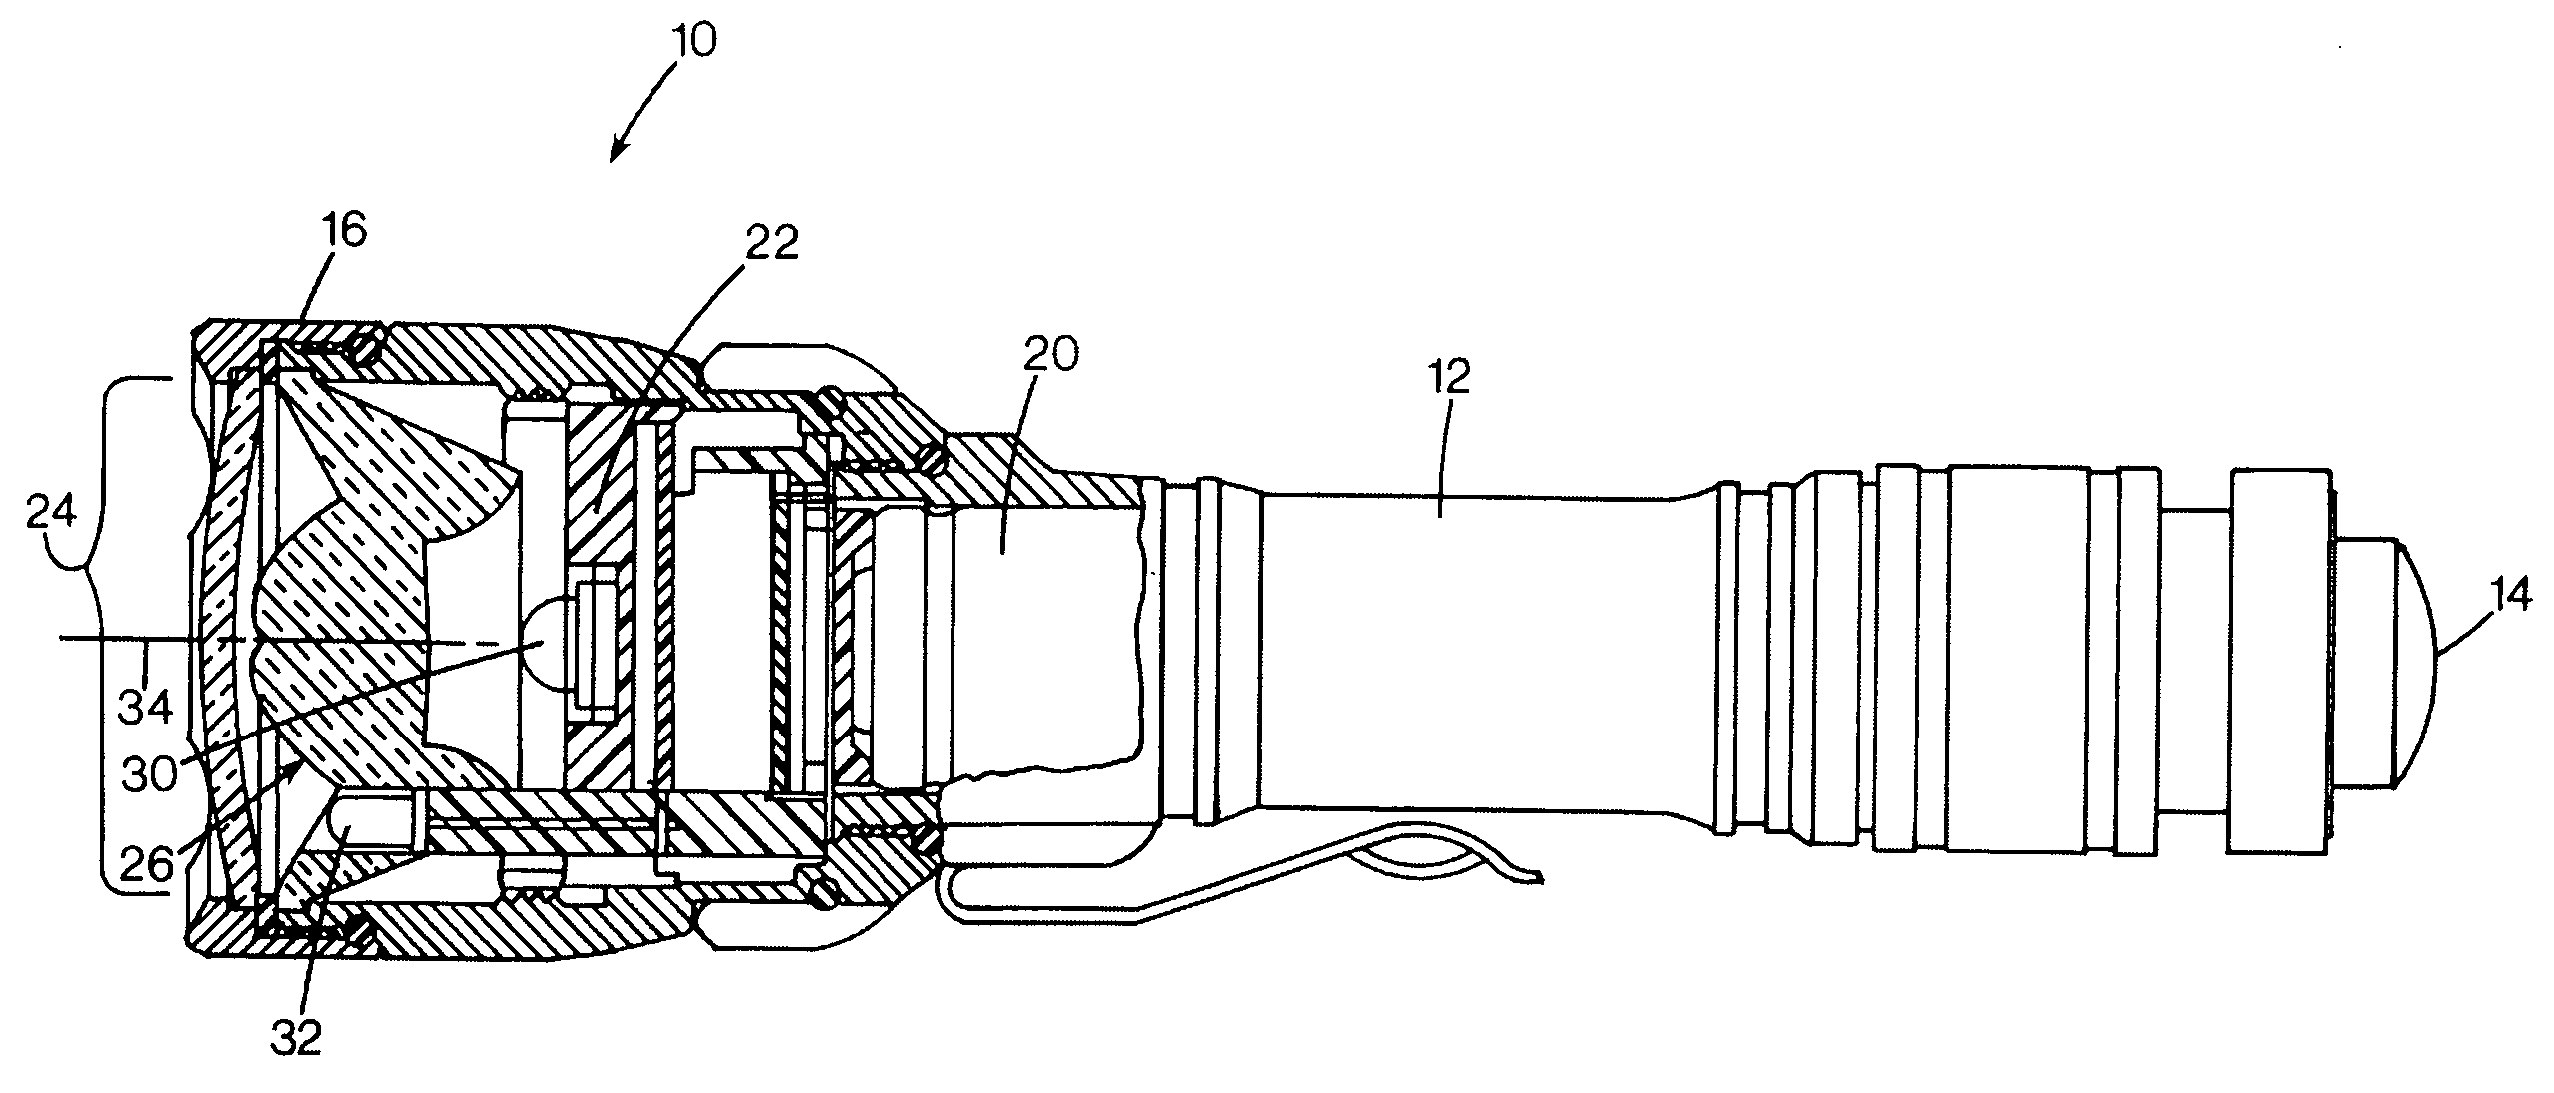 Flashlight with lens for transmitting central and off-axis light sources